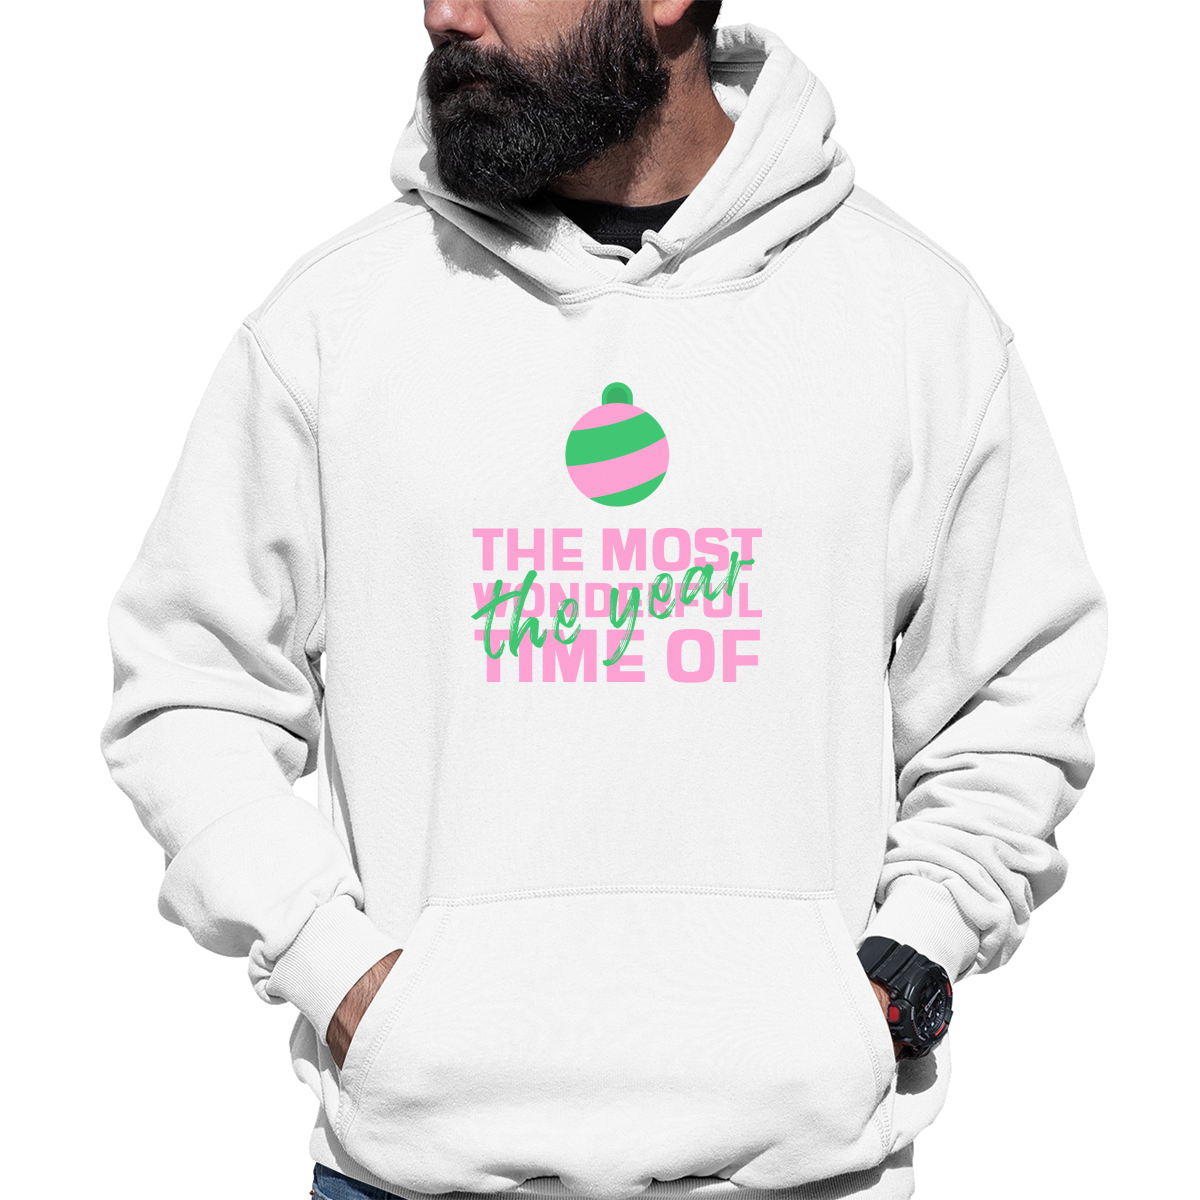 The Most Wonderful Time of the Year Unisex Hoodie | White